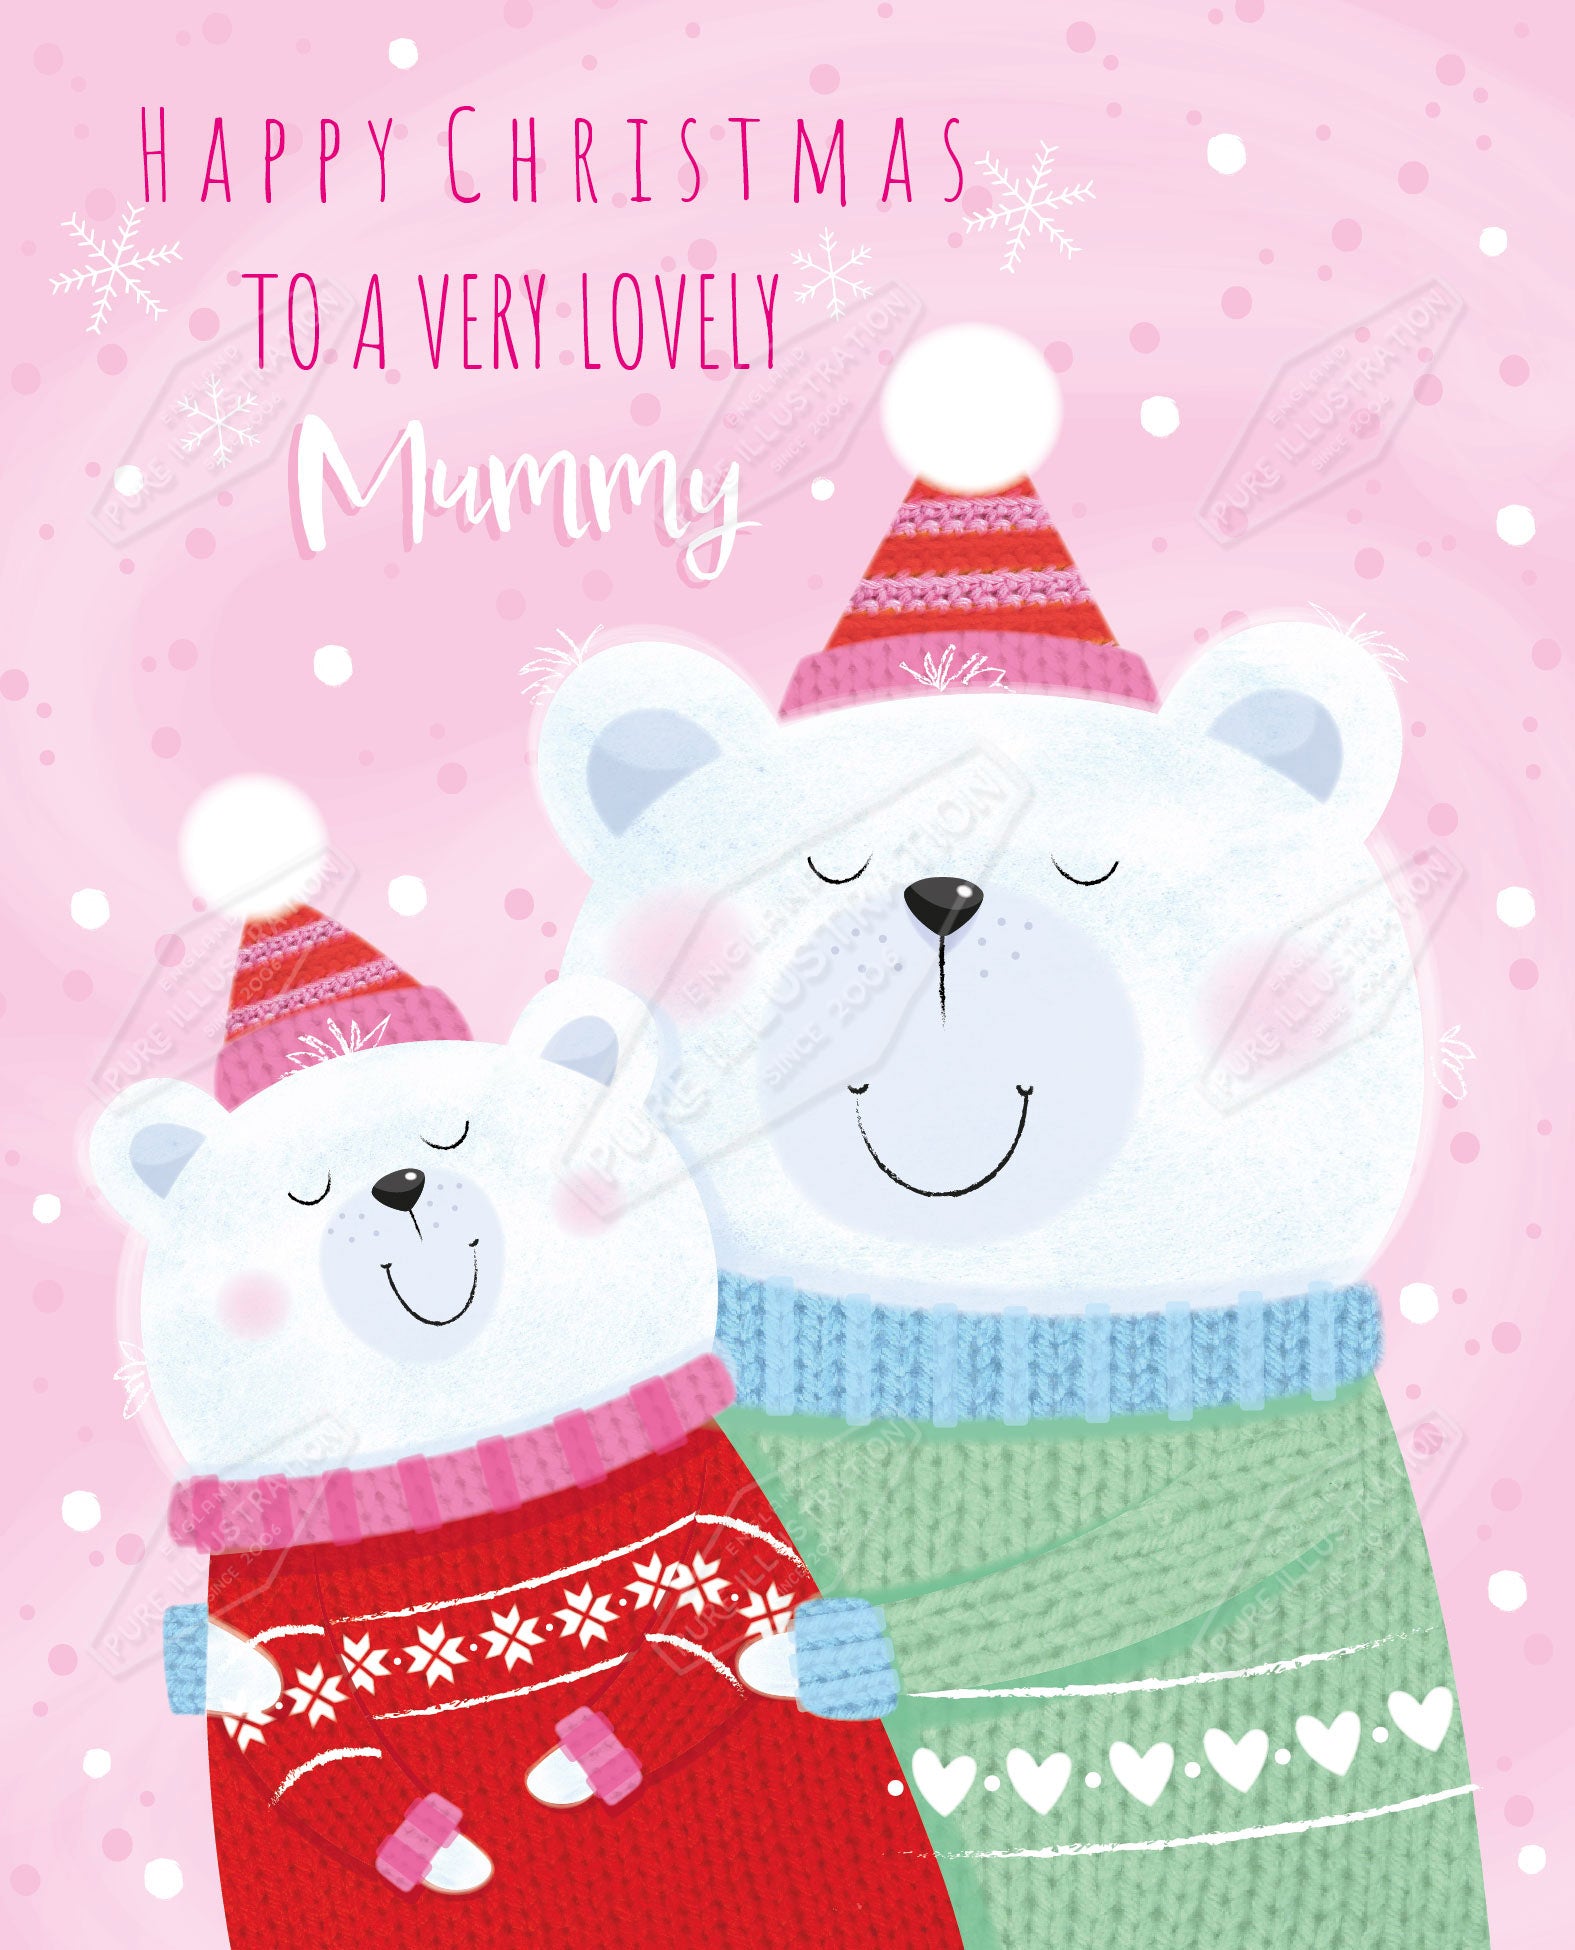 00035484SPI- Sarah Pitt is represented by Pure Art Licensing Agency - Christmas Greeting Card Design